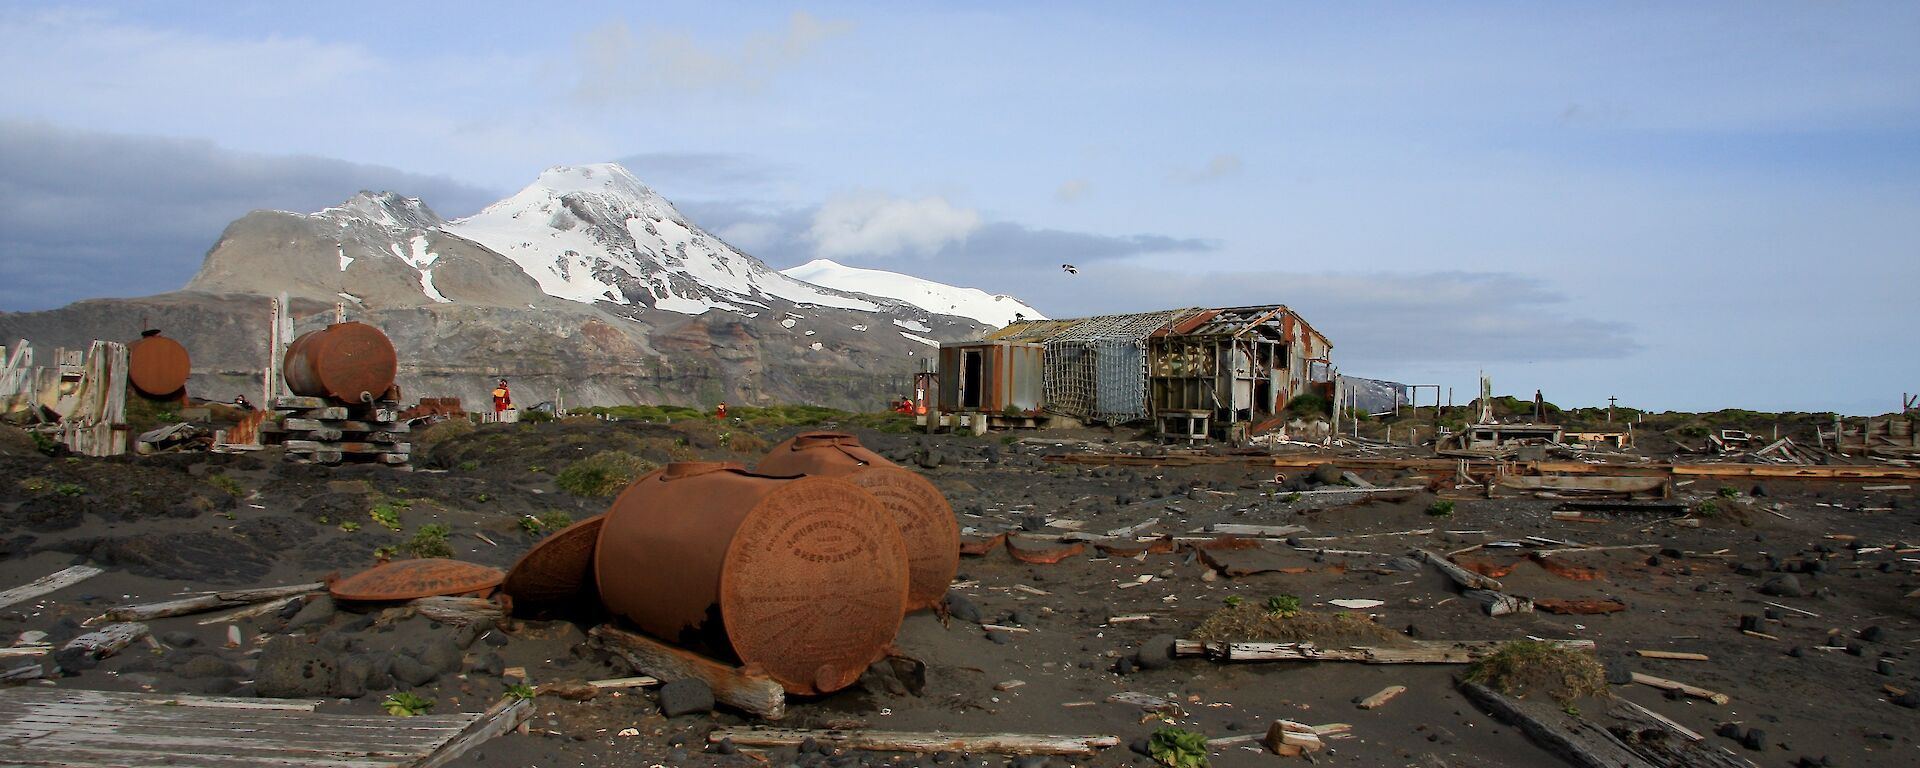 Abandoned huts and rusted tanks at former station site with snowcapped hill in background